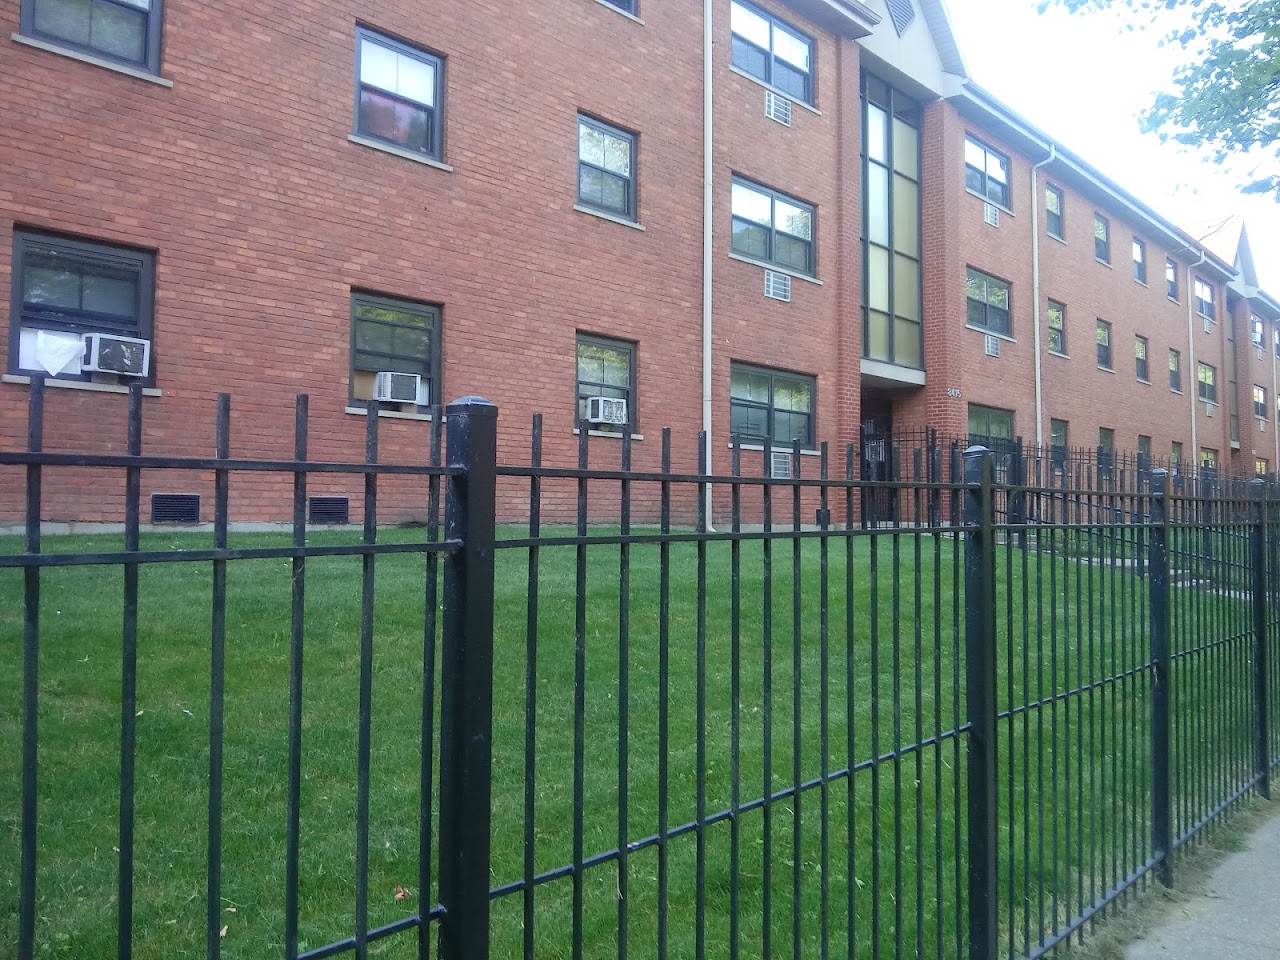 Photo of STONE TERRACE APARTMENT. Affordable housing located at 8409 S VINCENNES CHICAGO, IL 60620